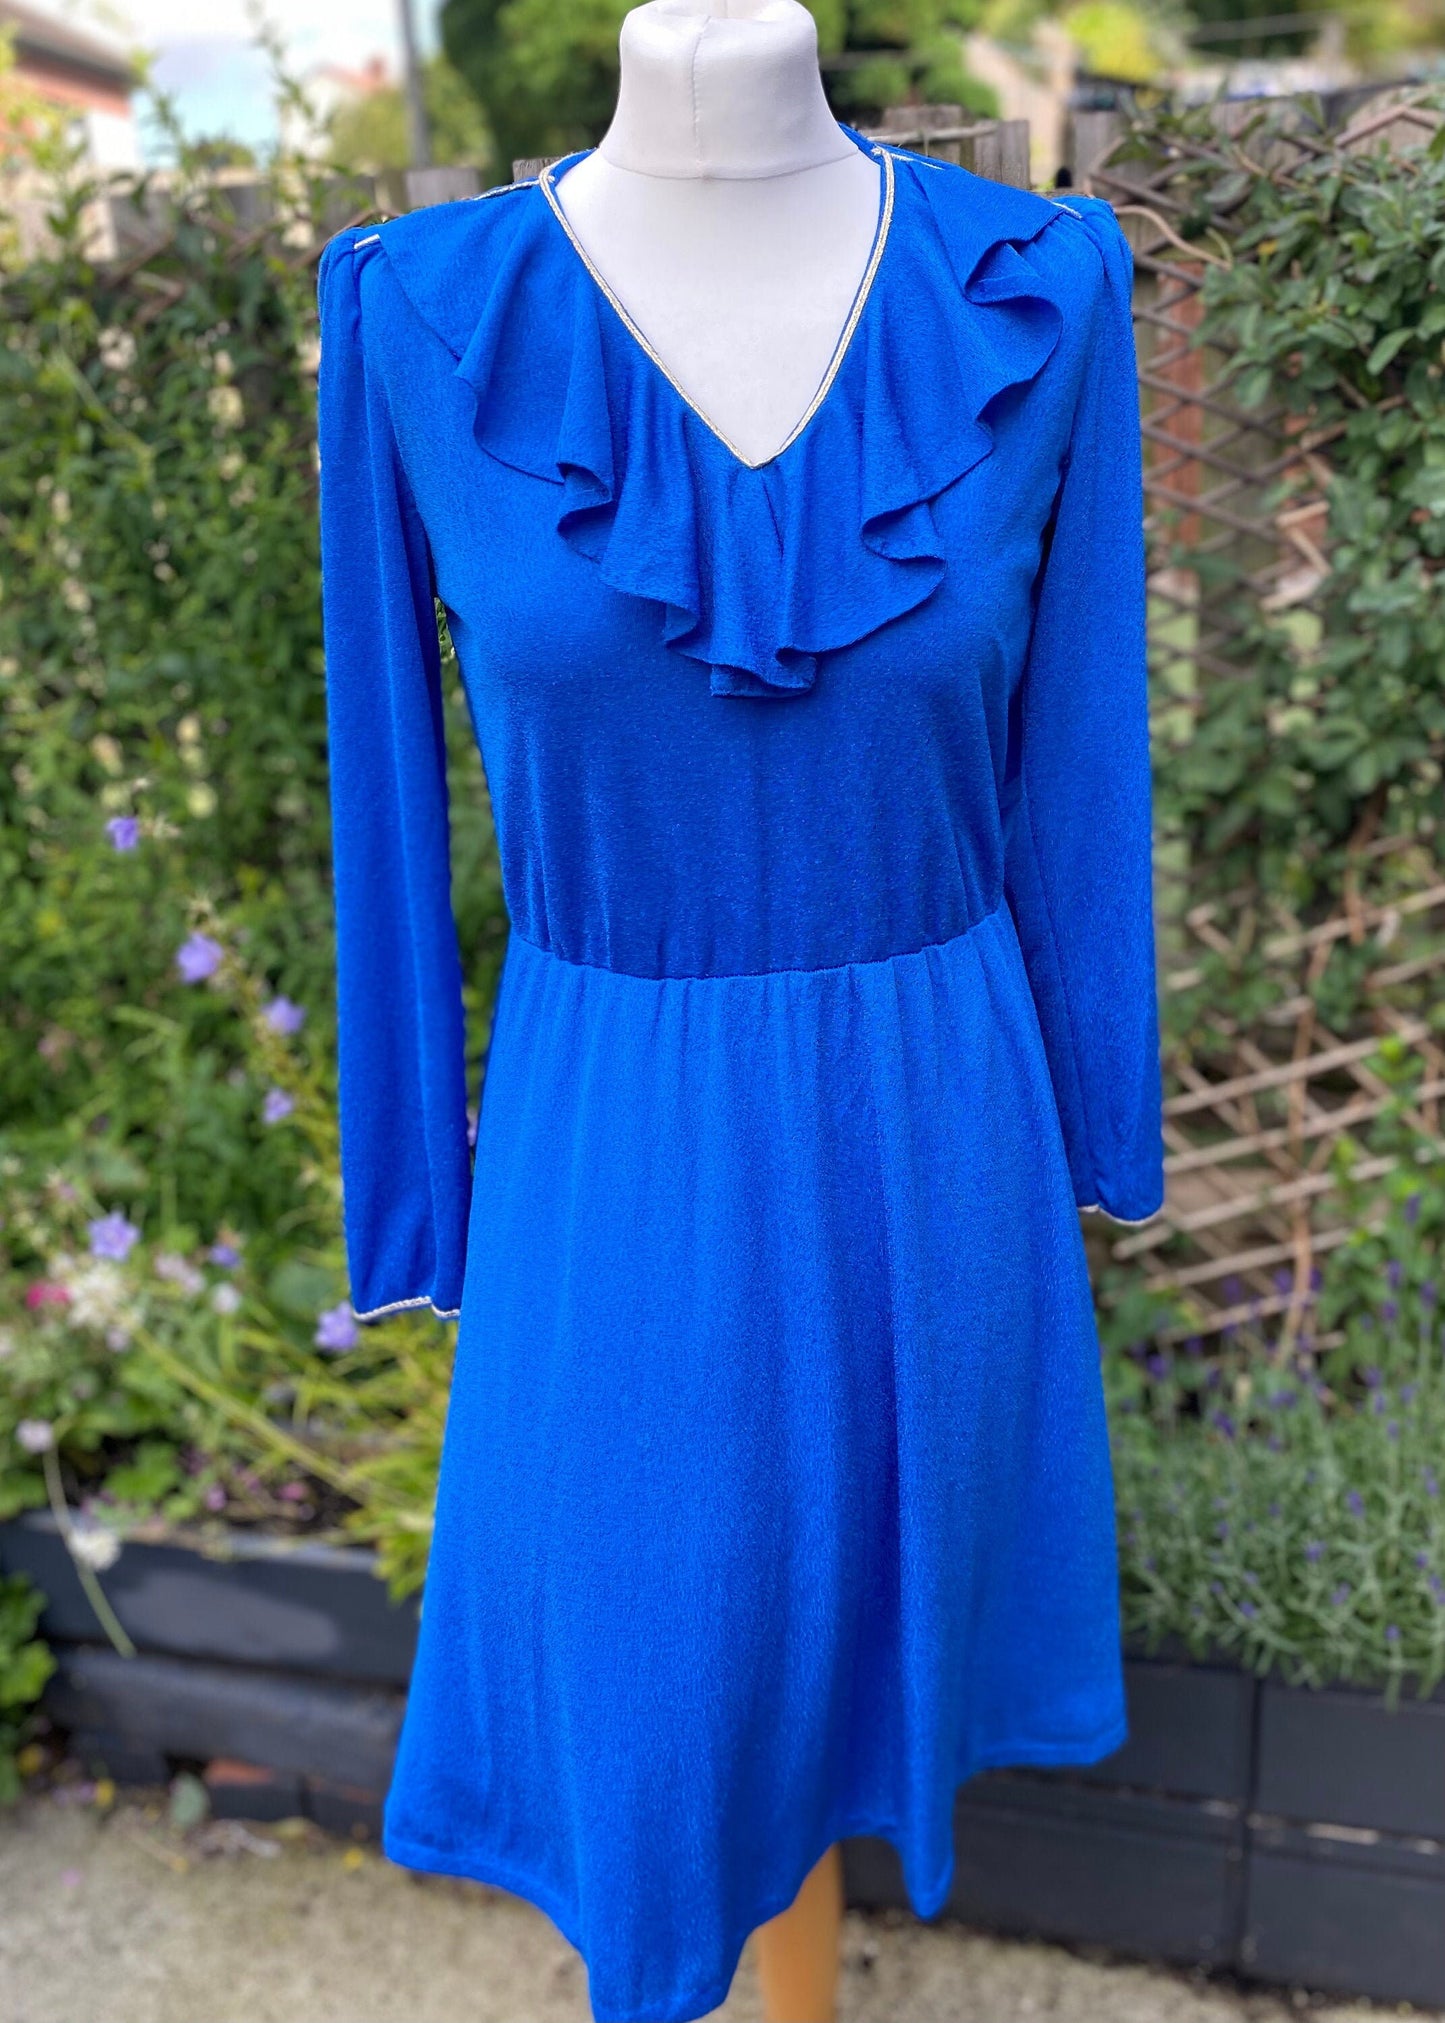 80s bright blue and gold party dress with frill neckline. Approx UK size 10-12